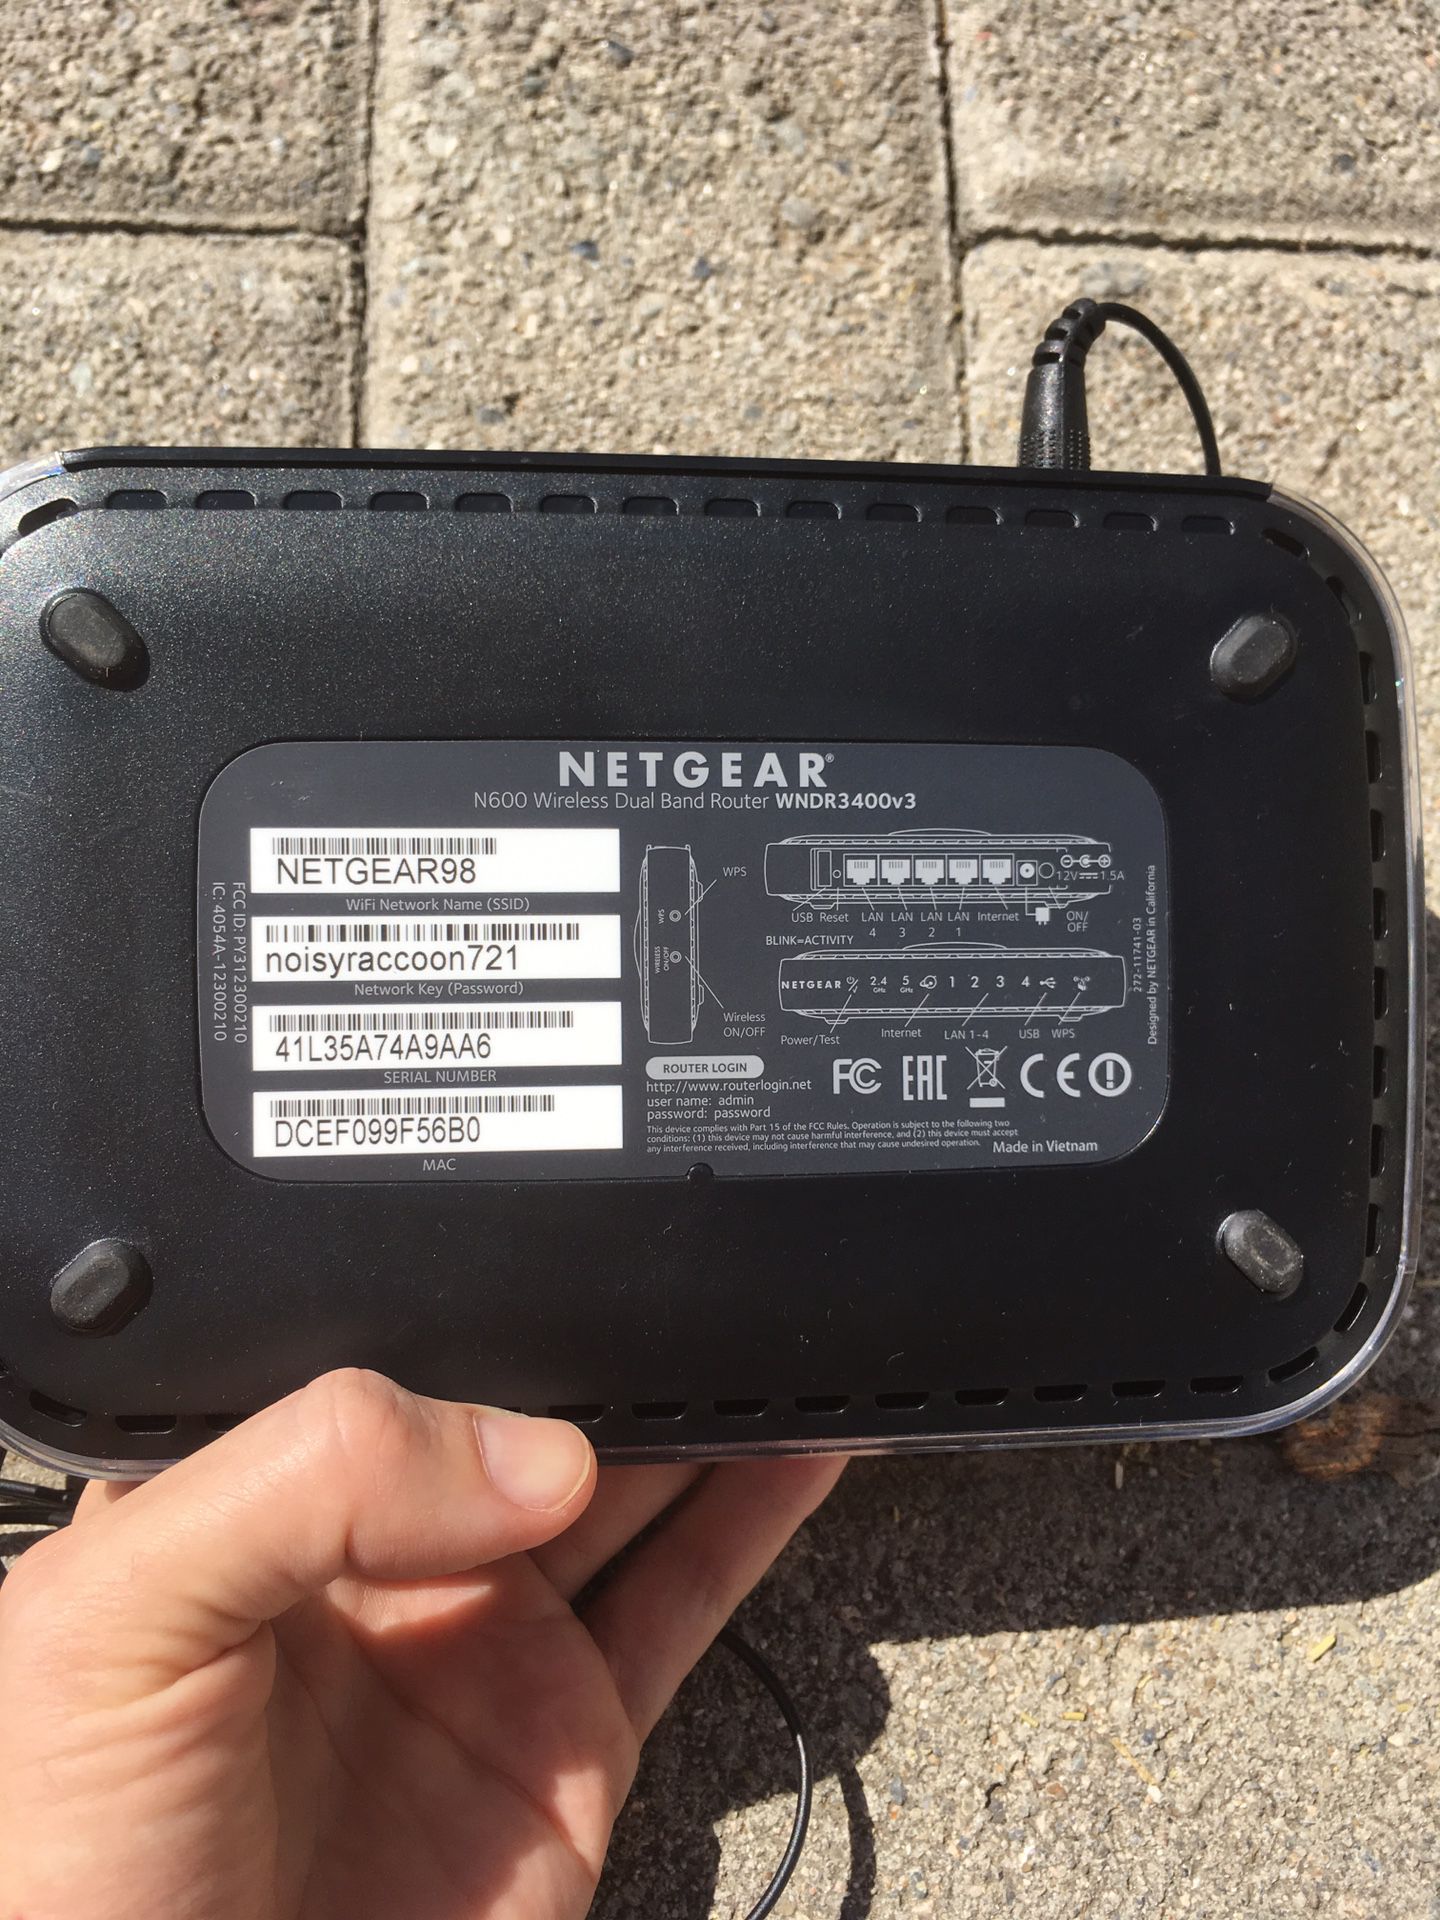 Zoom Modem and NetGear N600 Router